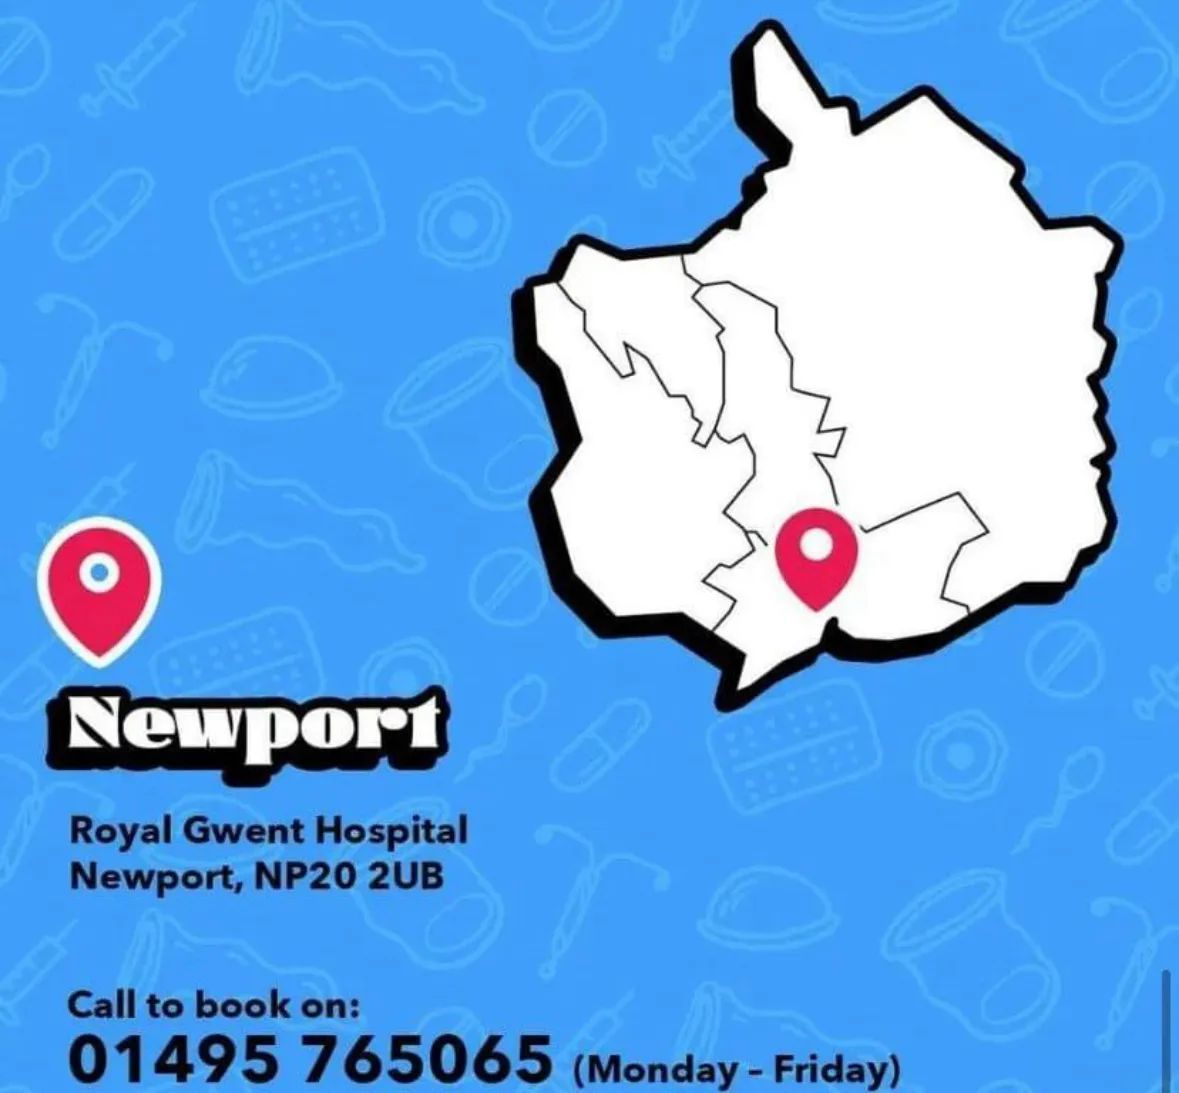 Contraception, Sexually Transmitted Infections, whatever it is, your local hub is here to help. Your local Sexual Health Hub in Newport is in the Royal Gwent Hospital. Call 01495 765065 to book an appointment. #SexualHealth #SafeSex #ABUHB #Gwent